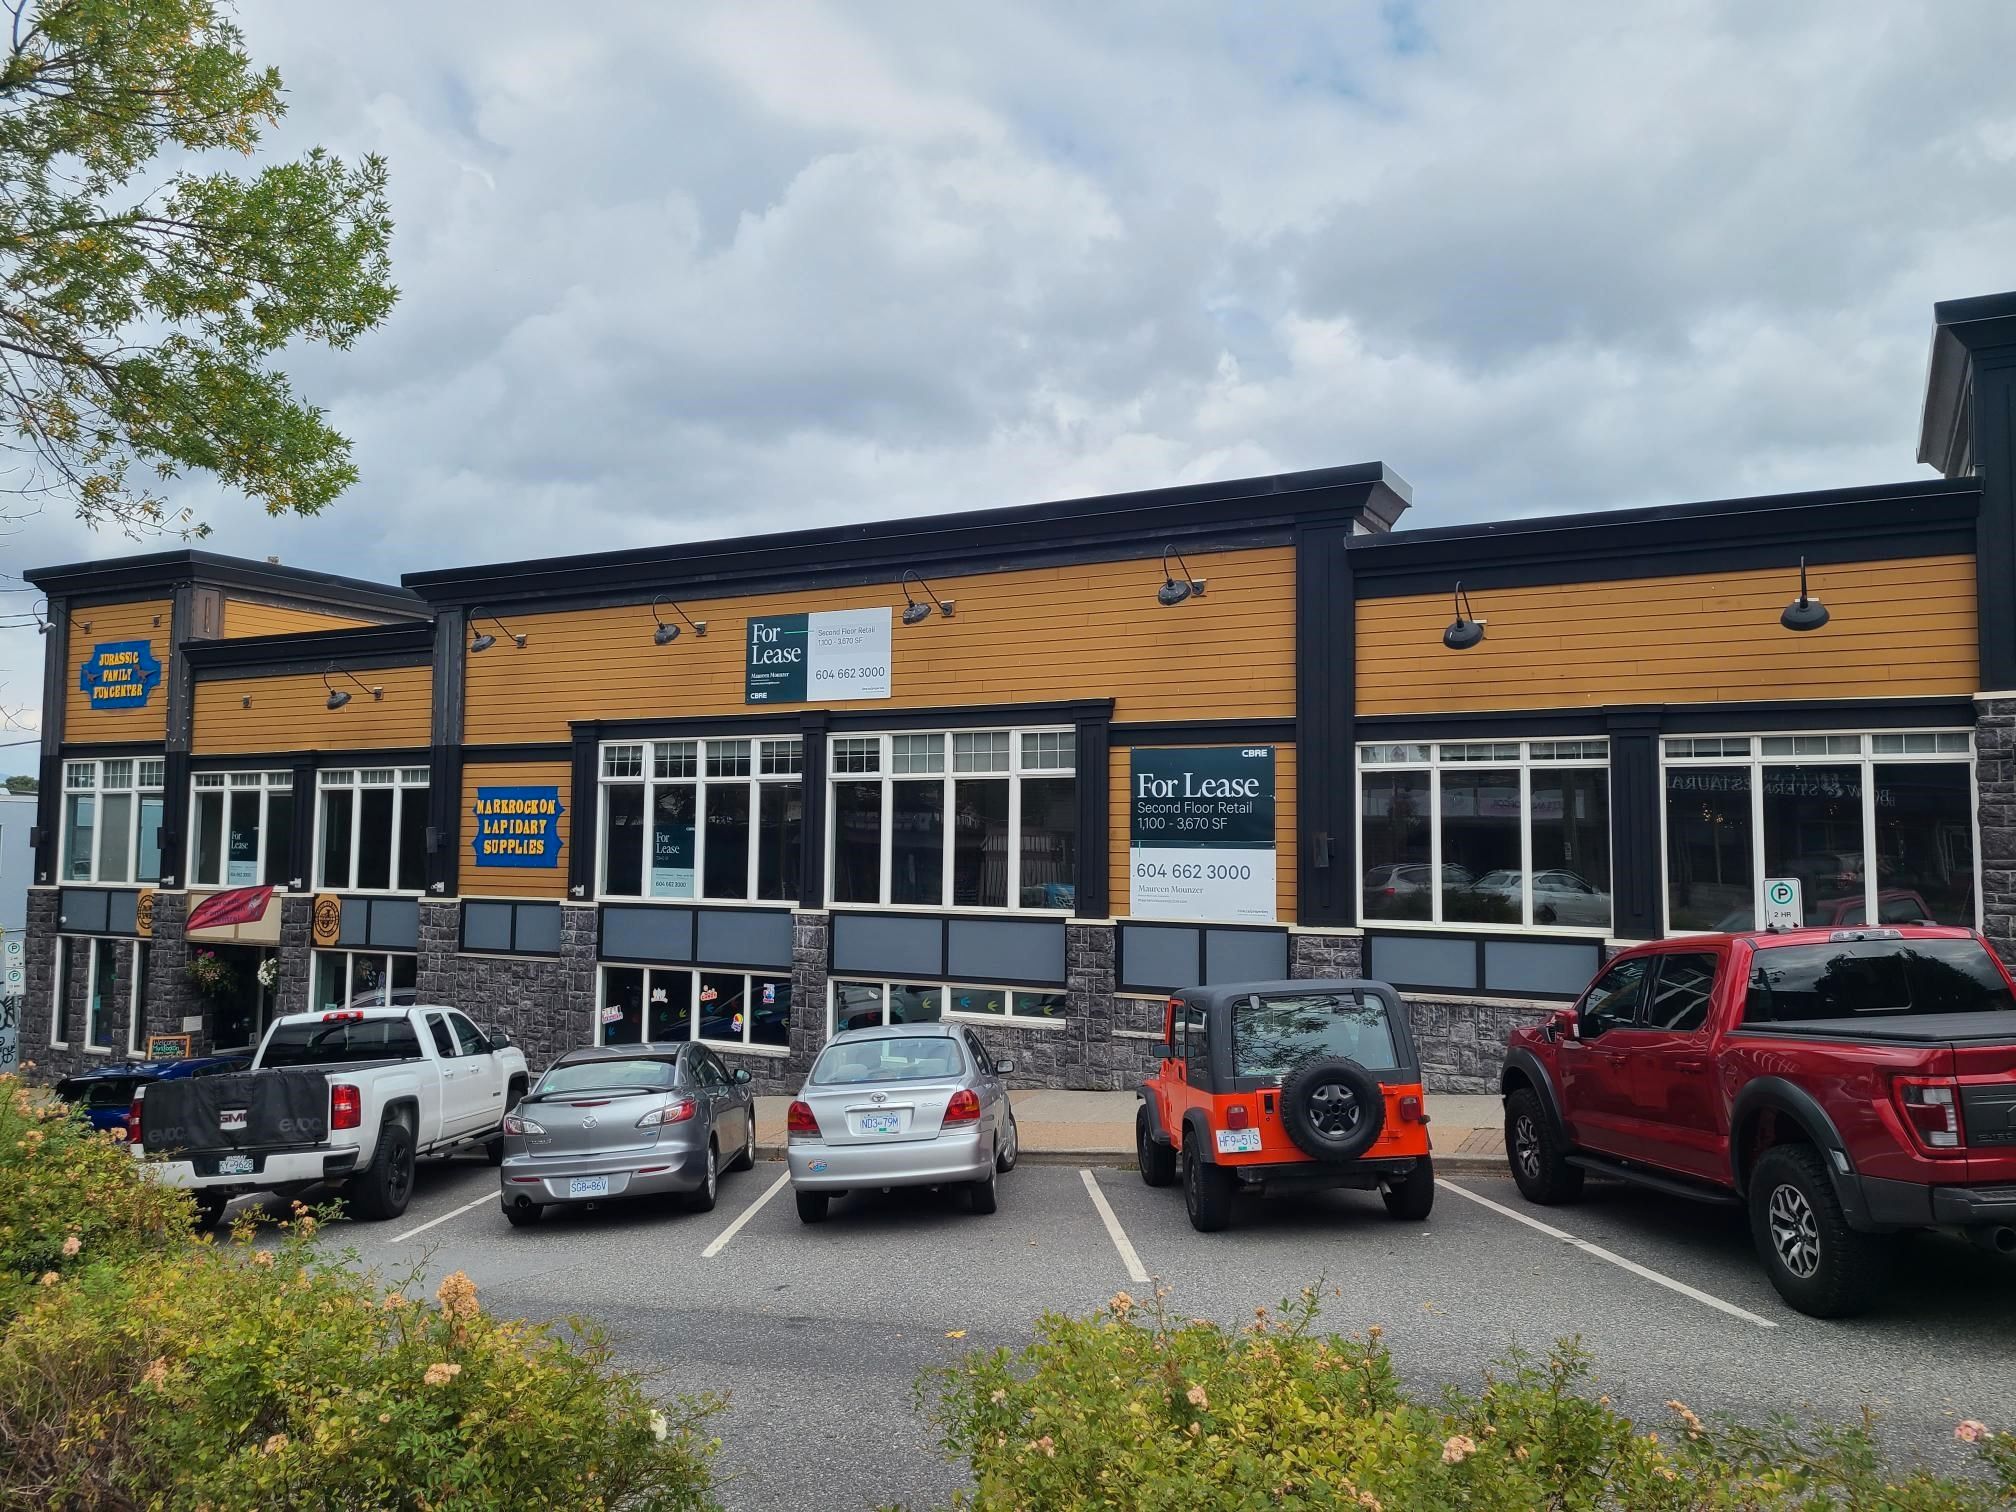 Main Photo: 201 2556 MONTROSE Avenue in Abbotsford: Central Abbotsford Office for lease : MLS®# C8053984